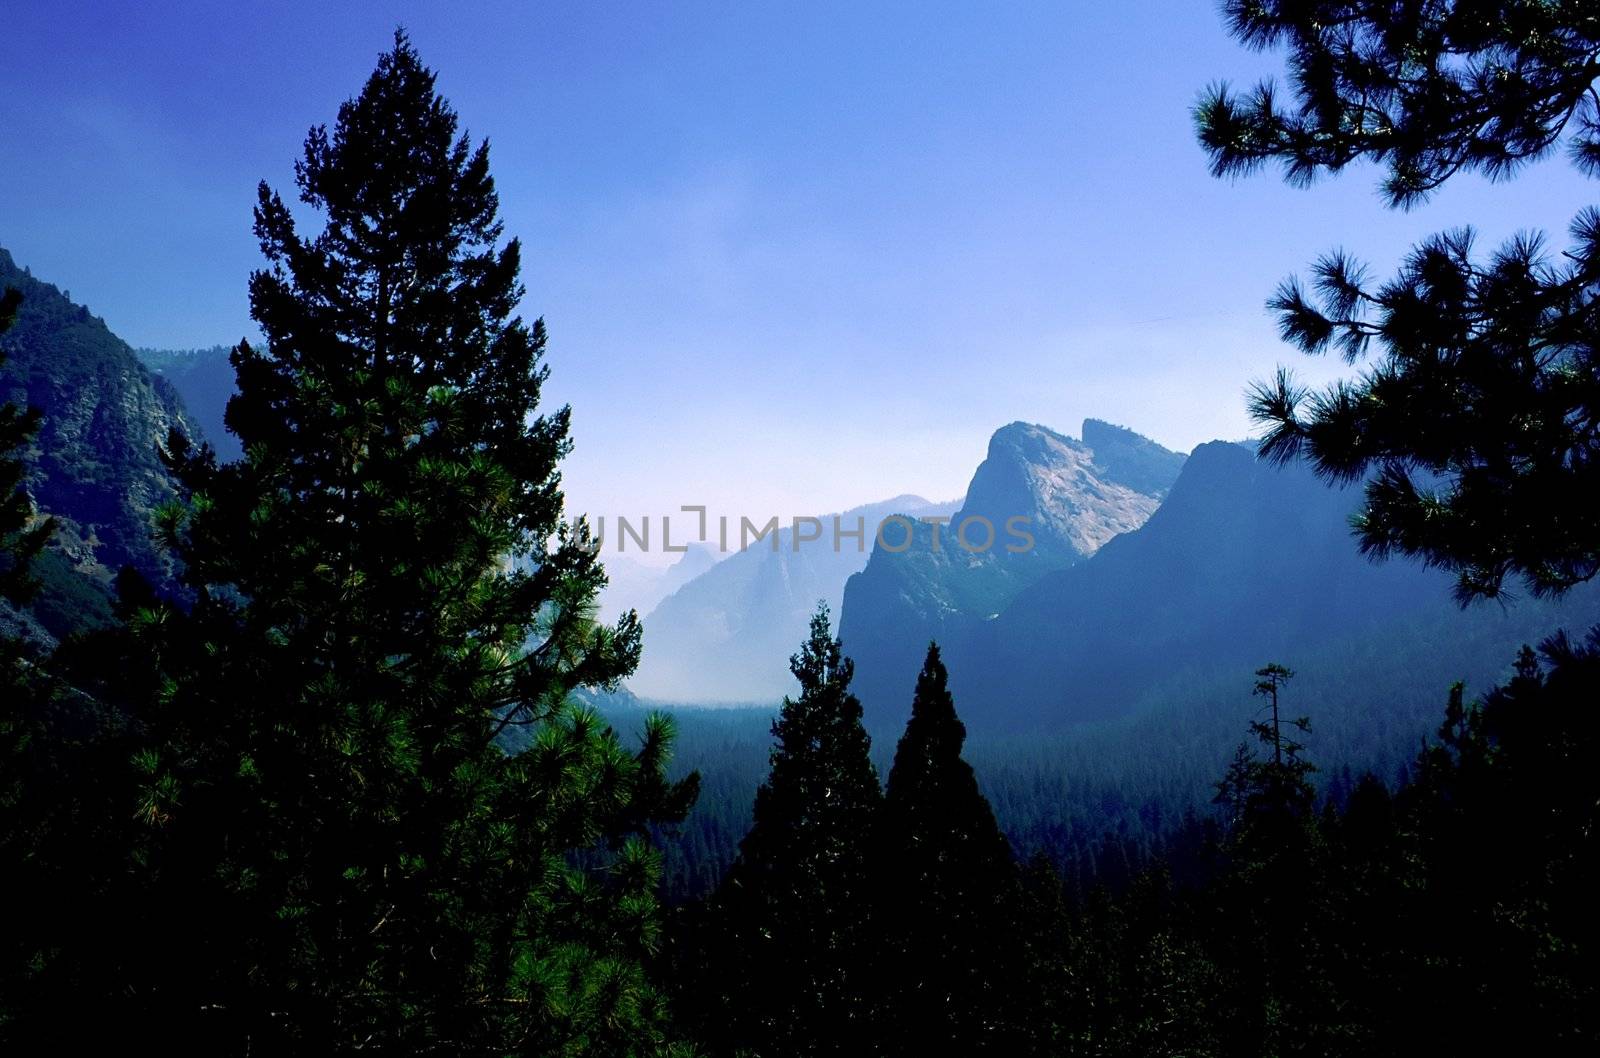 Yosemite National Park is a national park located largely in Mariposa and Tuolumne Counties, California, United States.